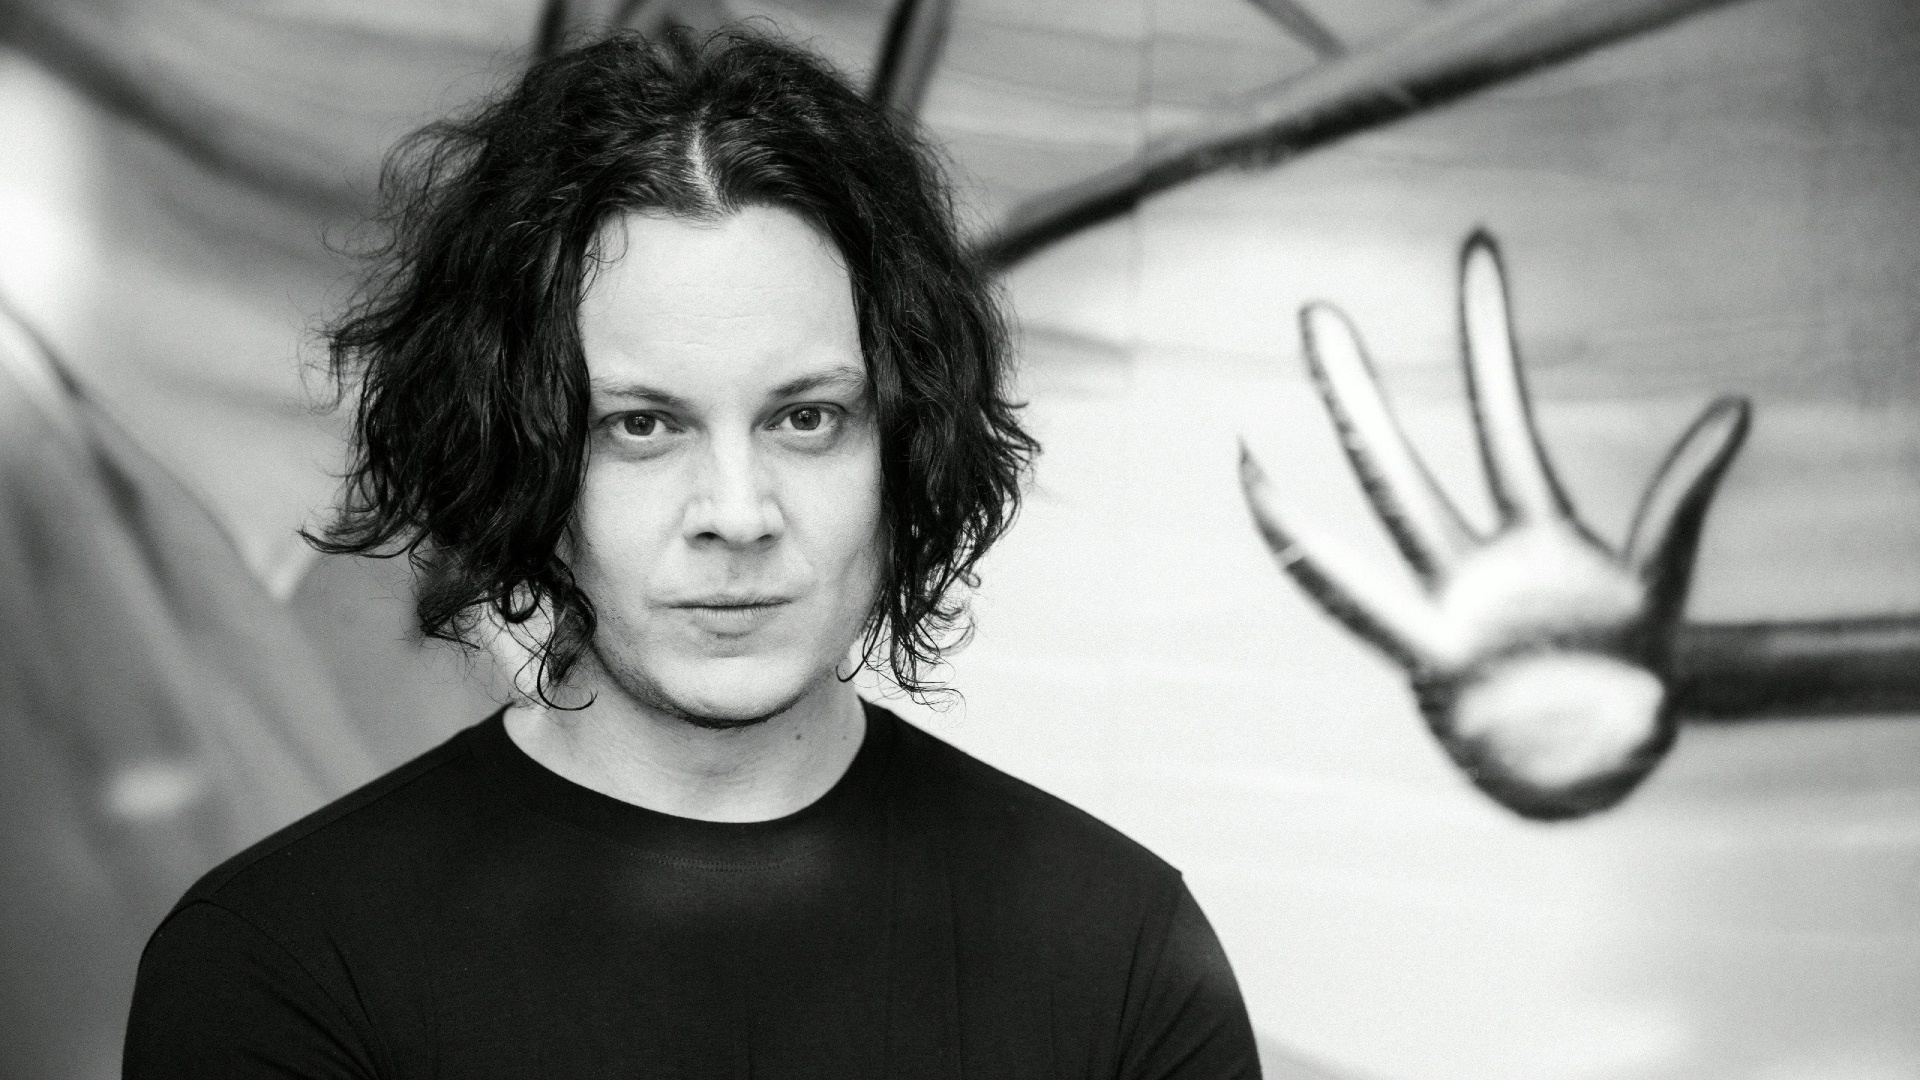 Renowned musician, Artistic fanart, Jack White vibes, Musical icon, 1920x1080 Full HD Desktop